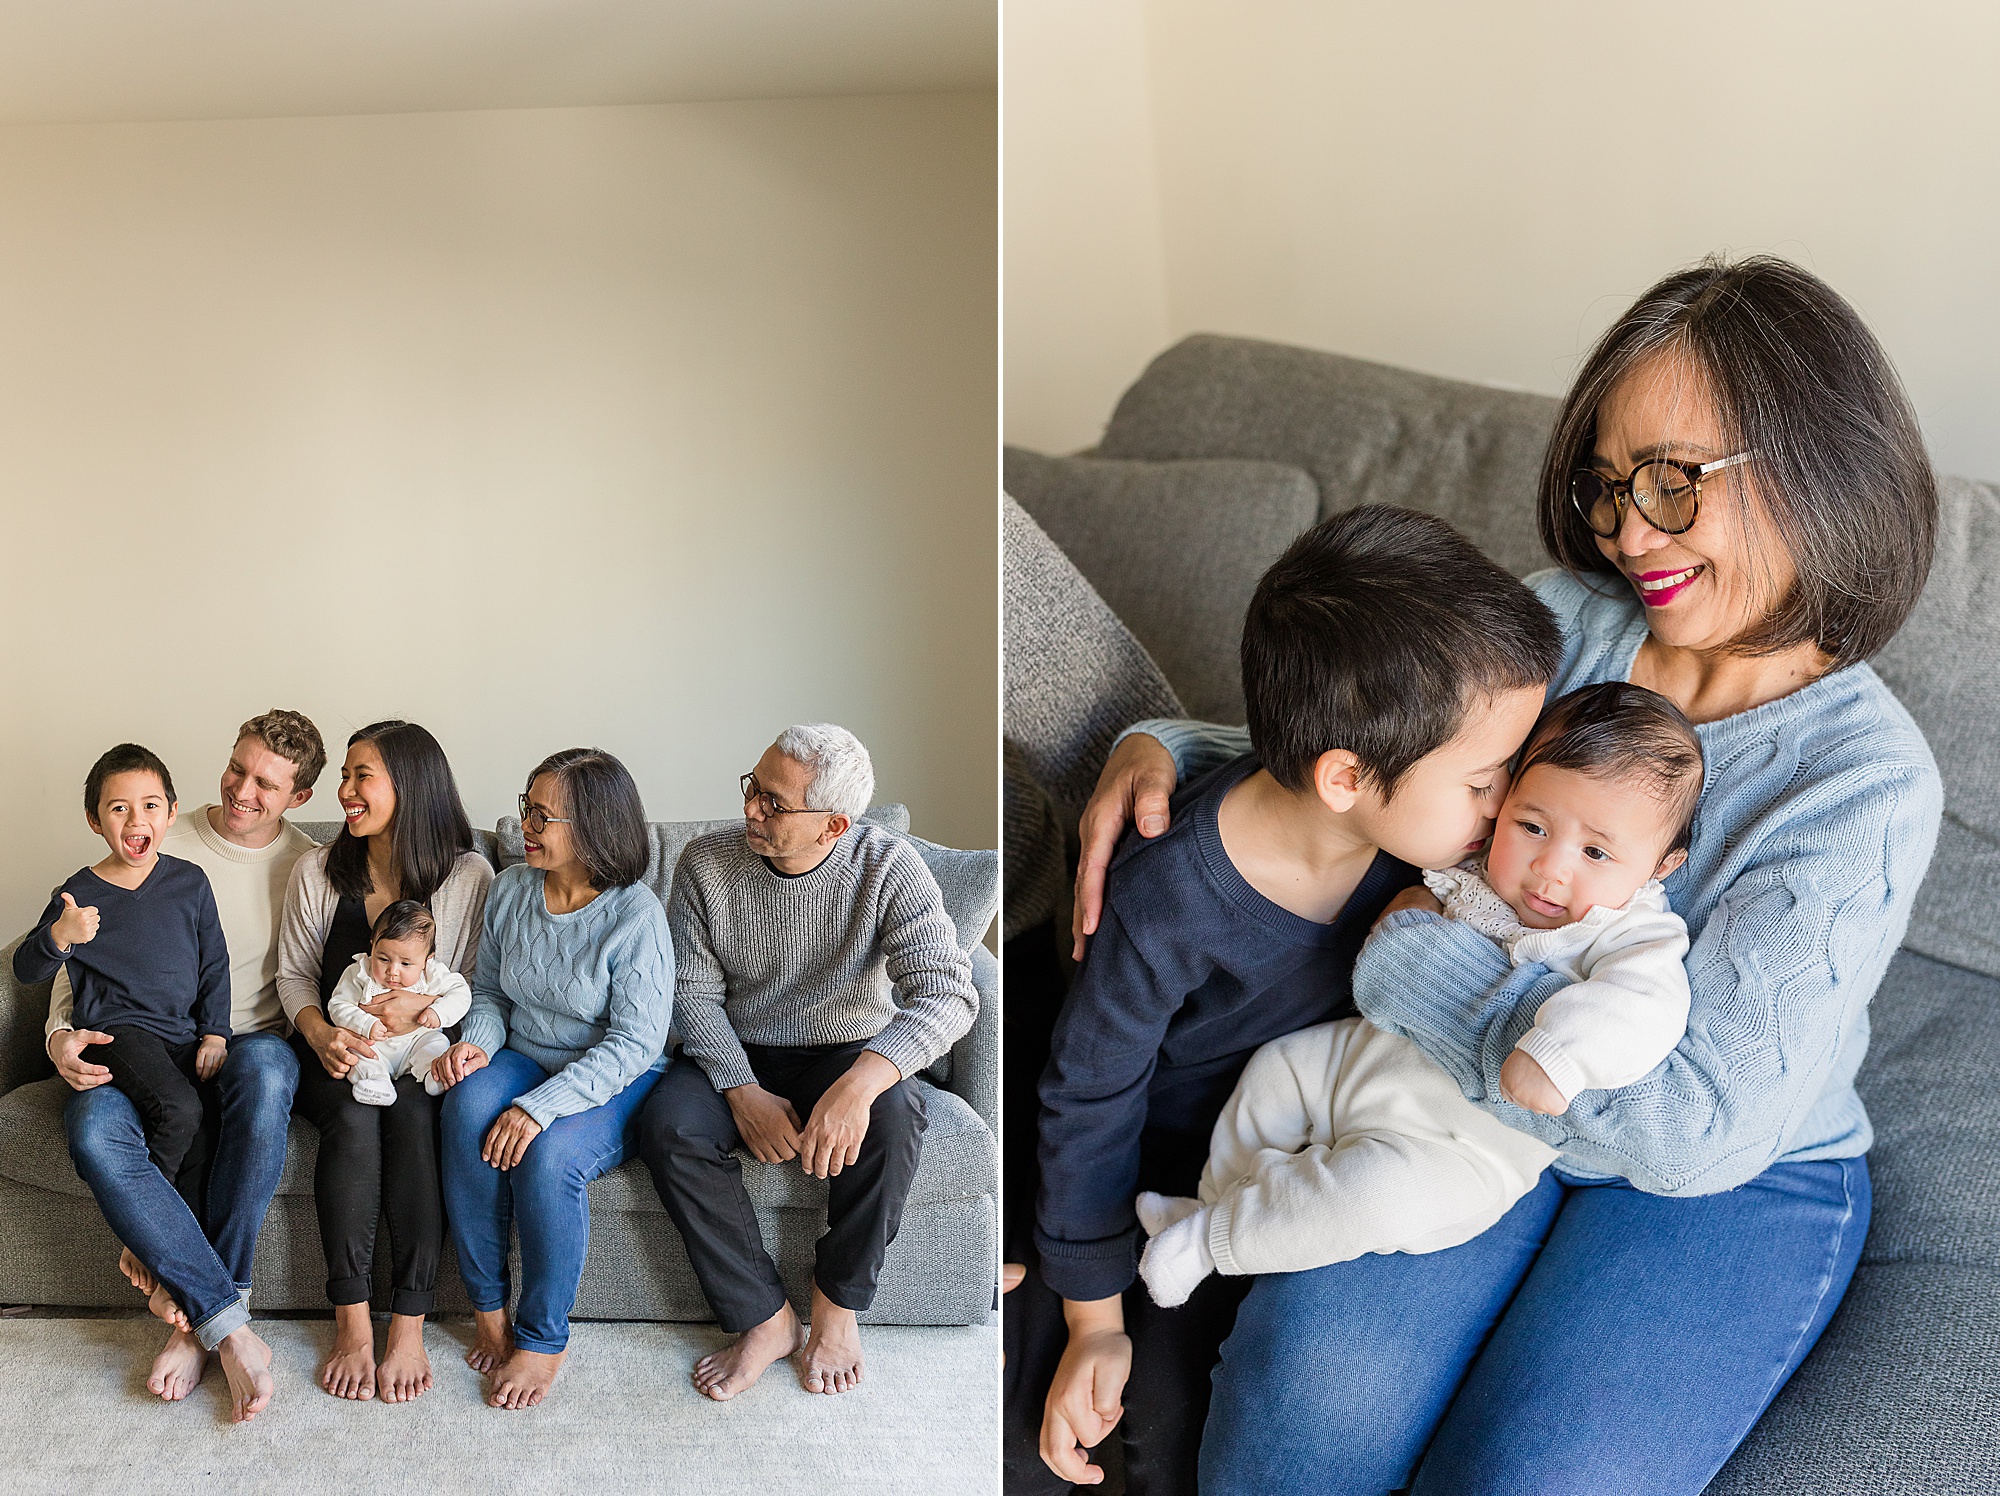 grandparents pose with family on couch during lifestyle photos